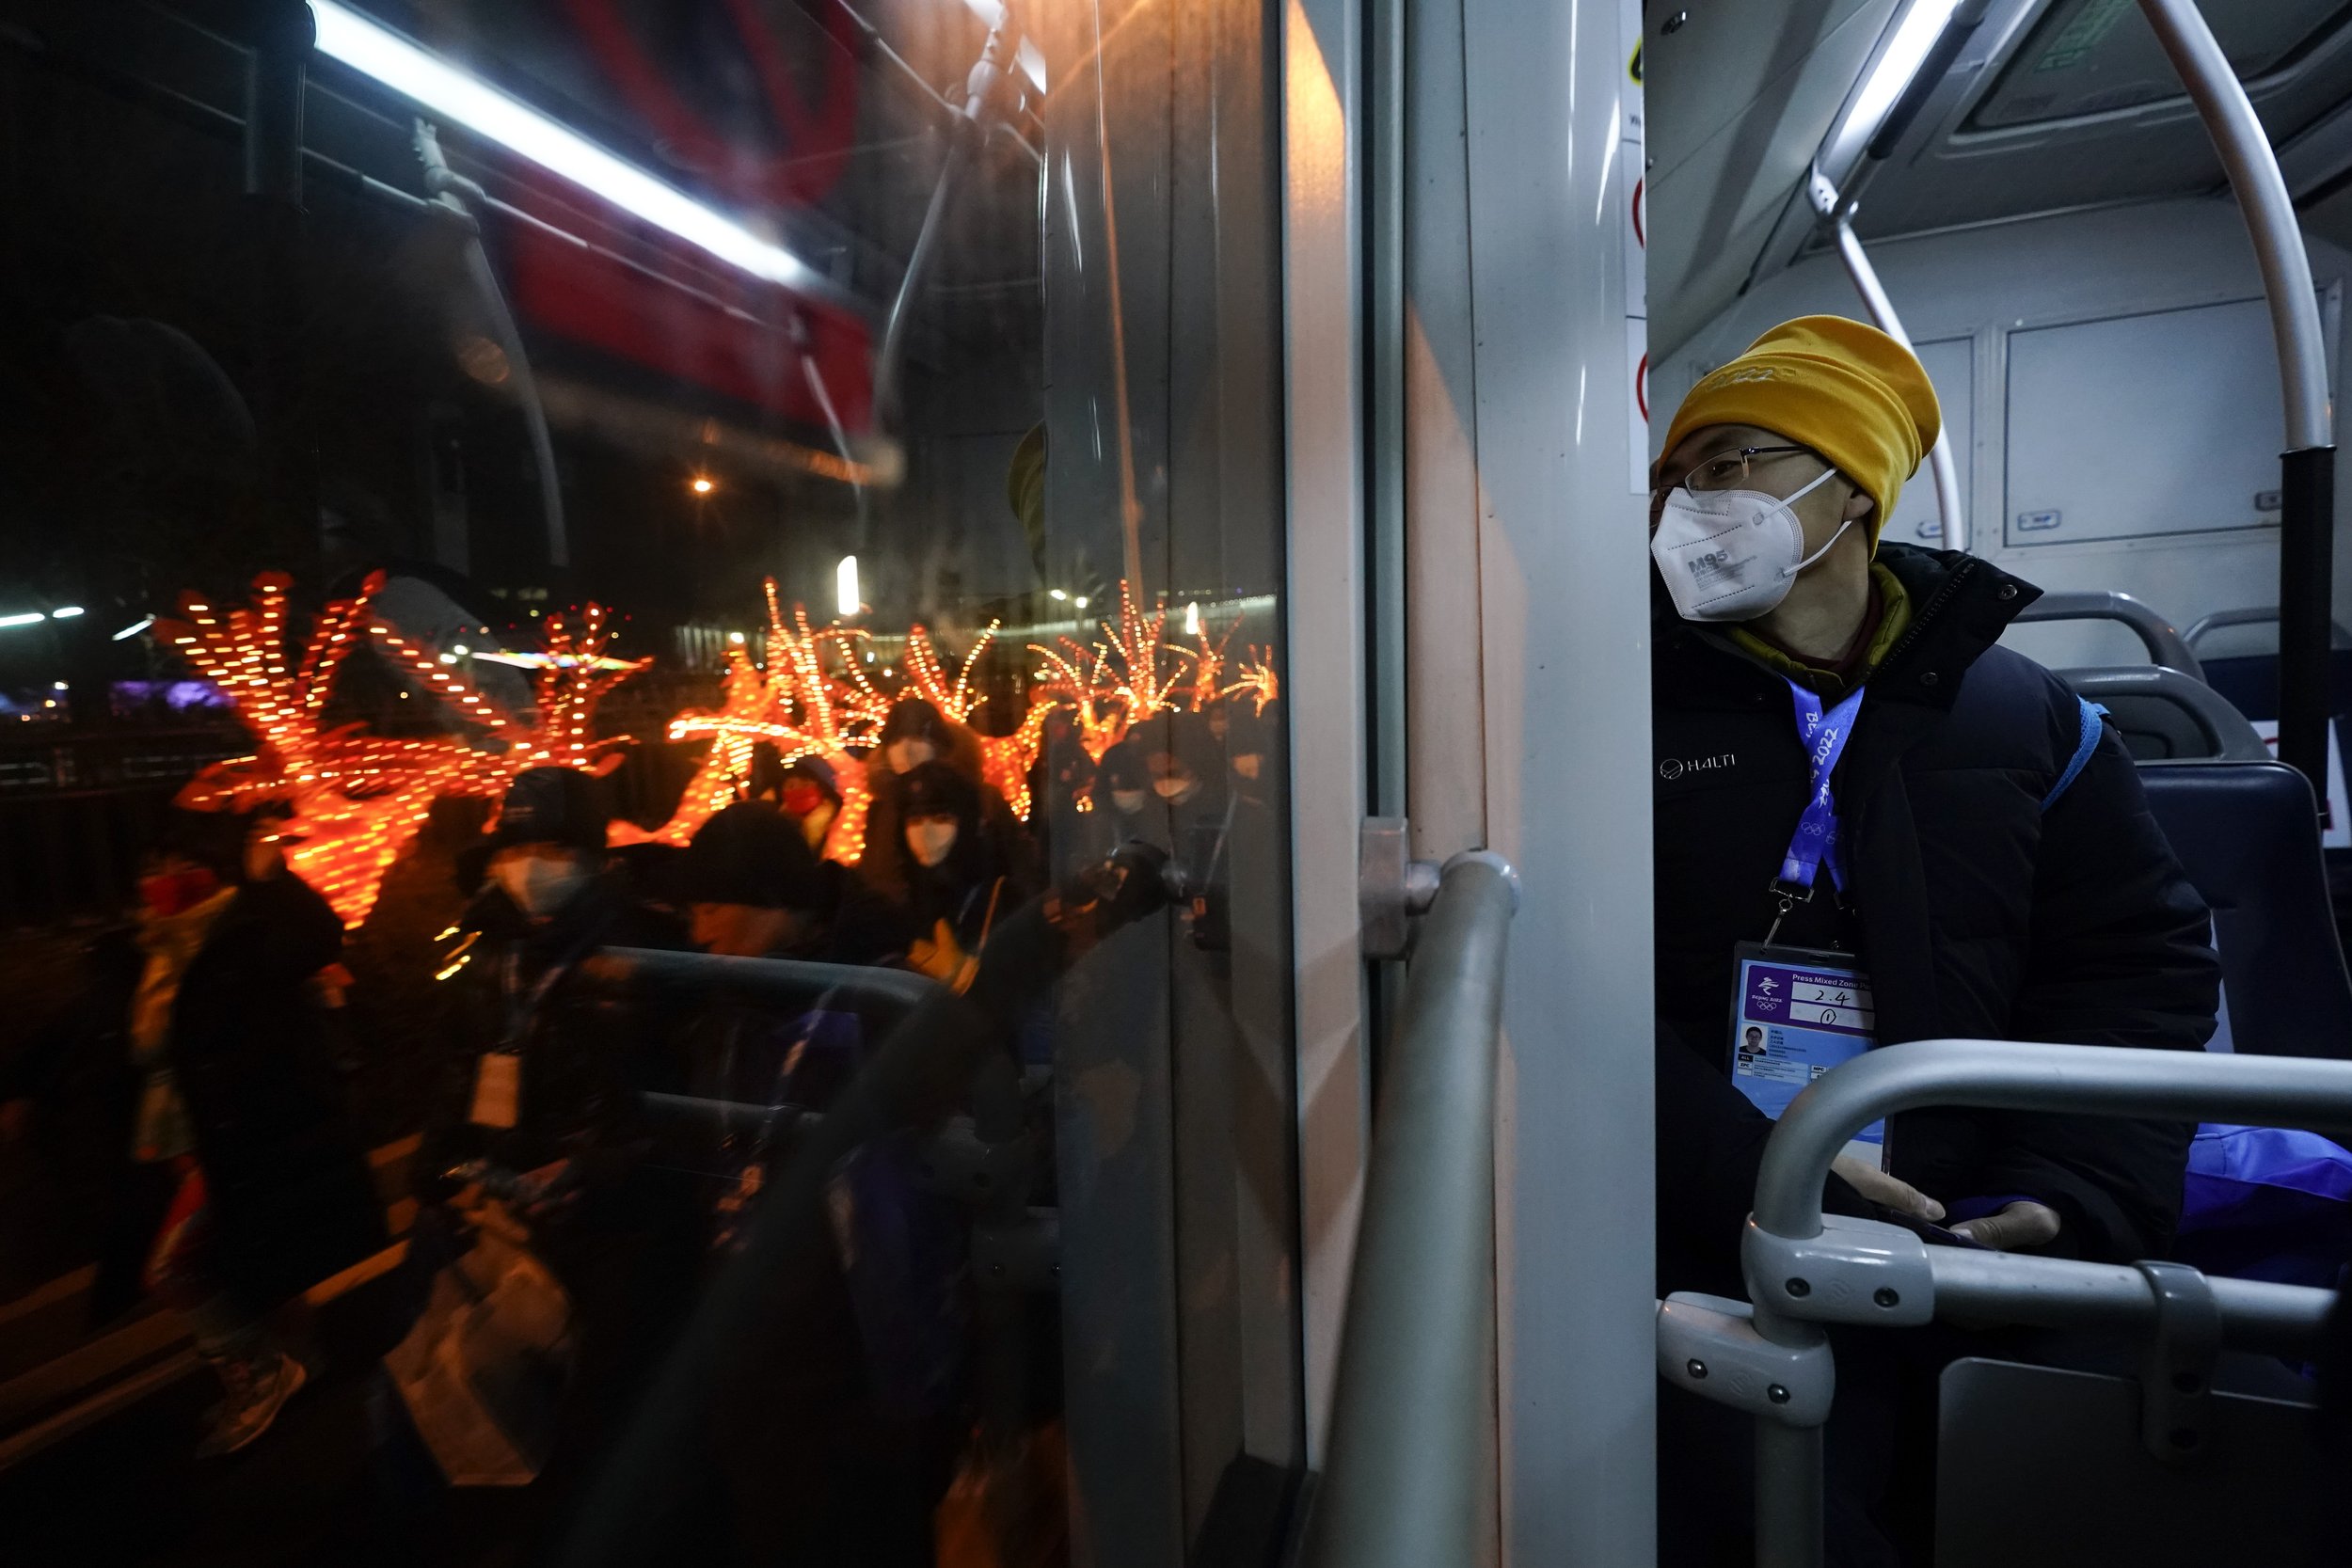  A journalist looks out the window of an Olympic shuttle bus as performers walk along the street with props used at the opening ceremony of the 2022 Winter Olympics, Saturday, Feb. 5, 2022, in Beijing. (AP Photo/Jae C. Hong) 